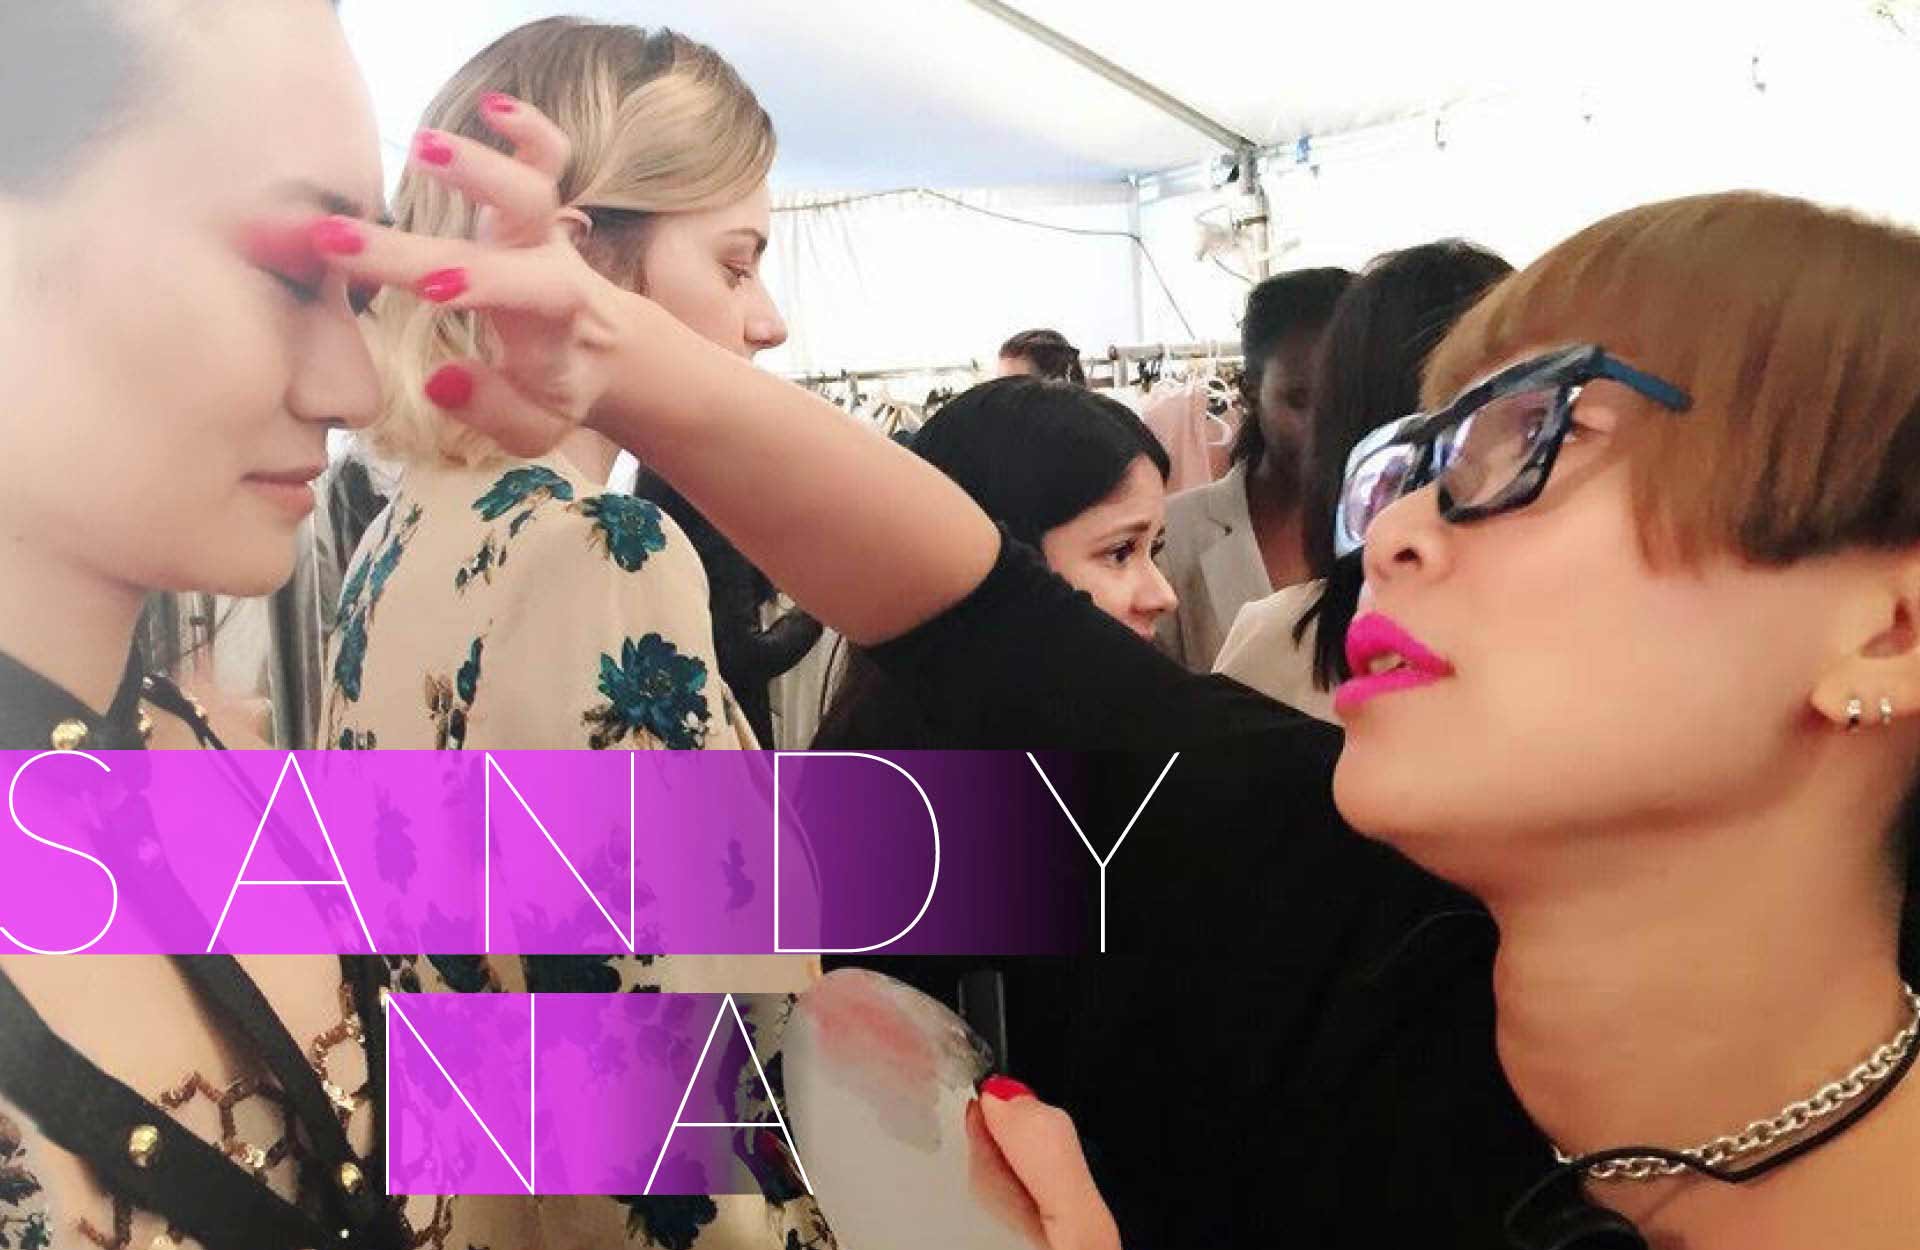 Jet-Setting Makeup Artist Sandy Na Brings Beauty to New Heights